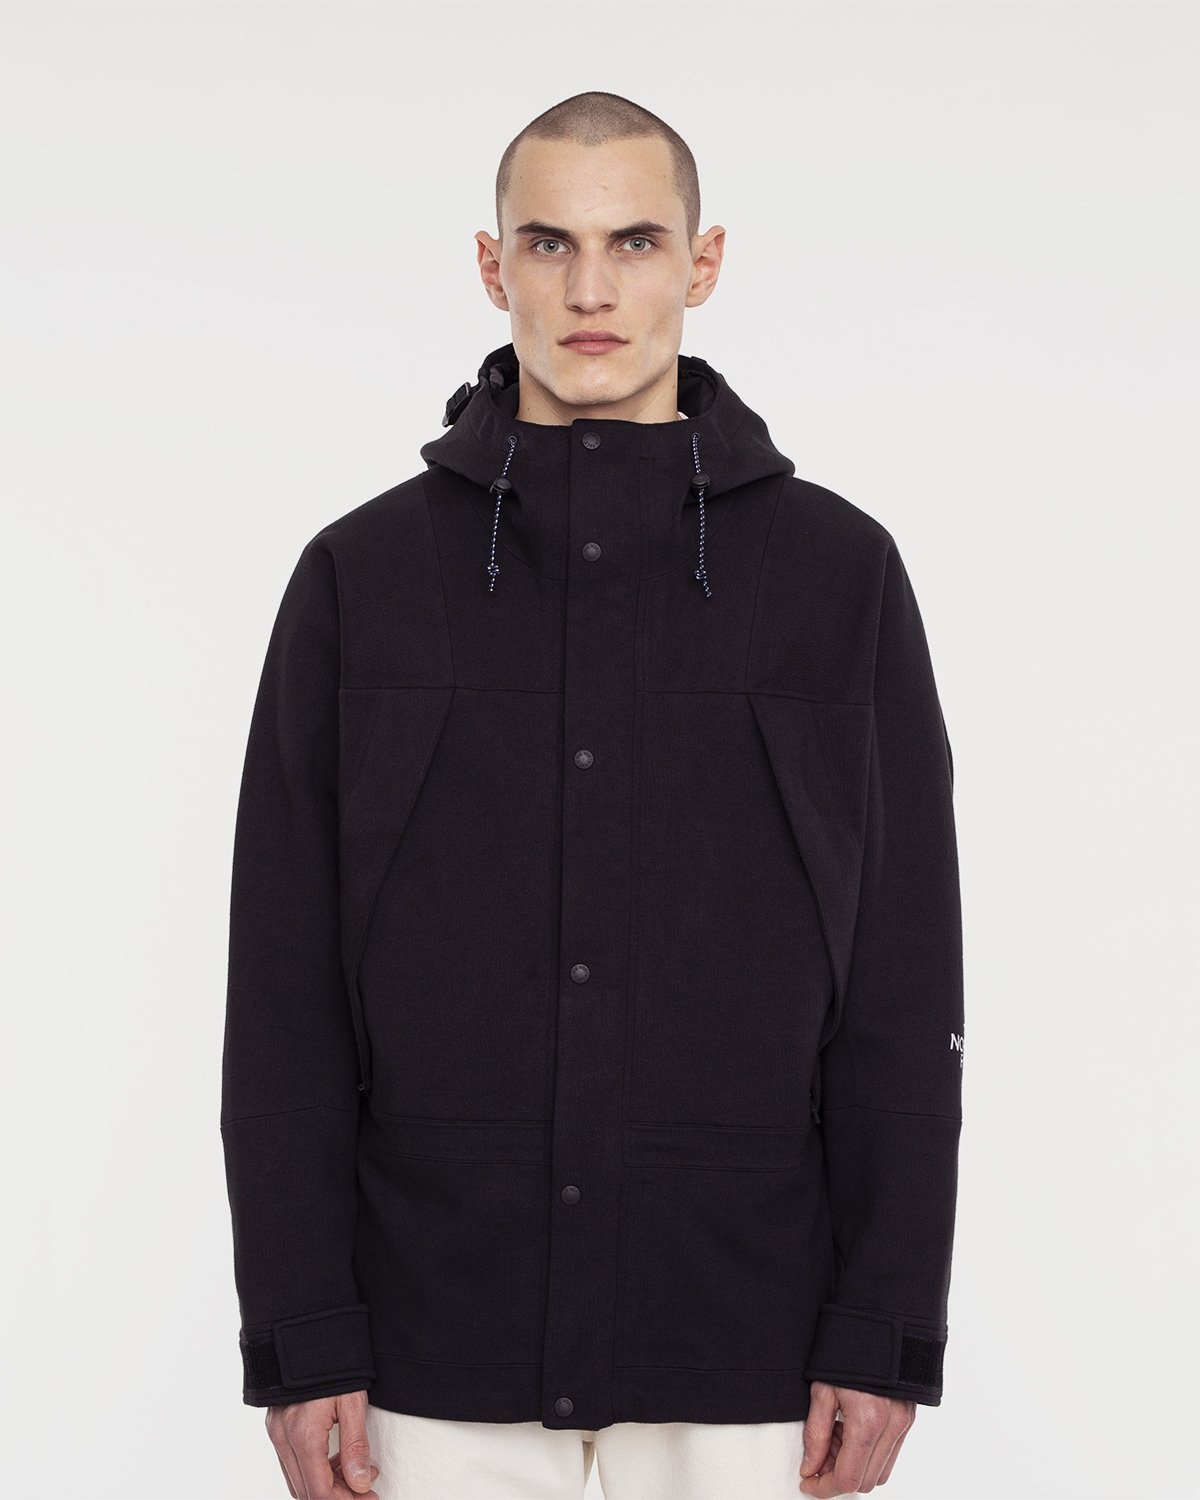 The North Face – Black Series Spacer Knit Mountain Light Jacket Black - Outerwear - Black - Image 2